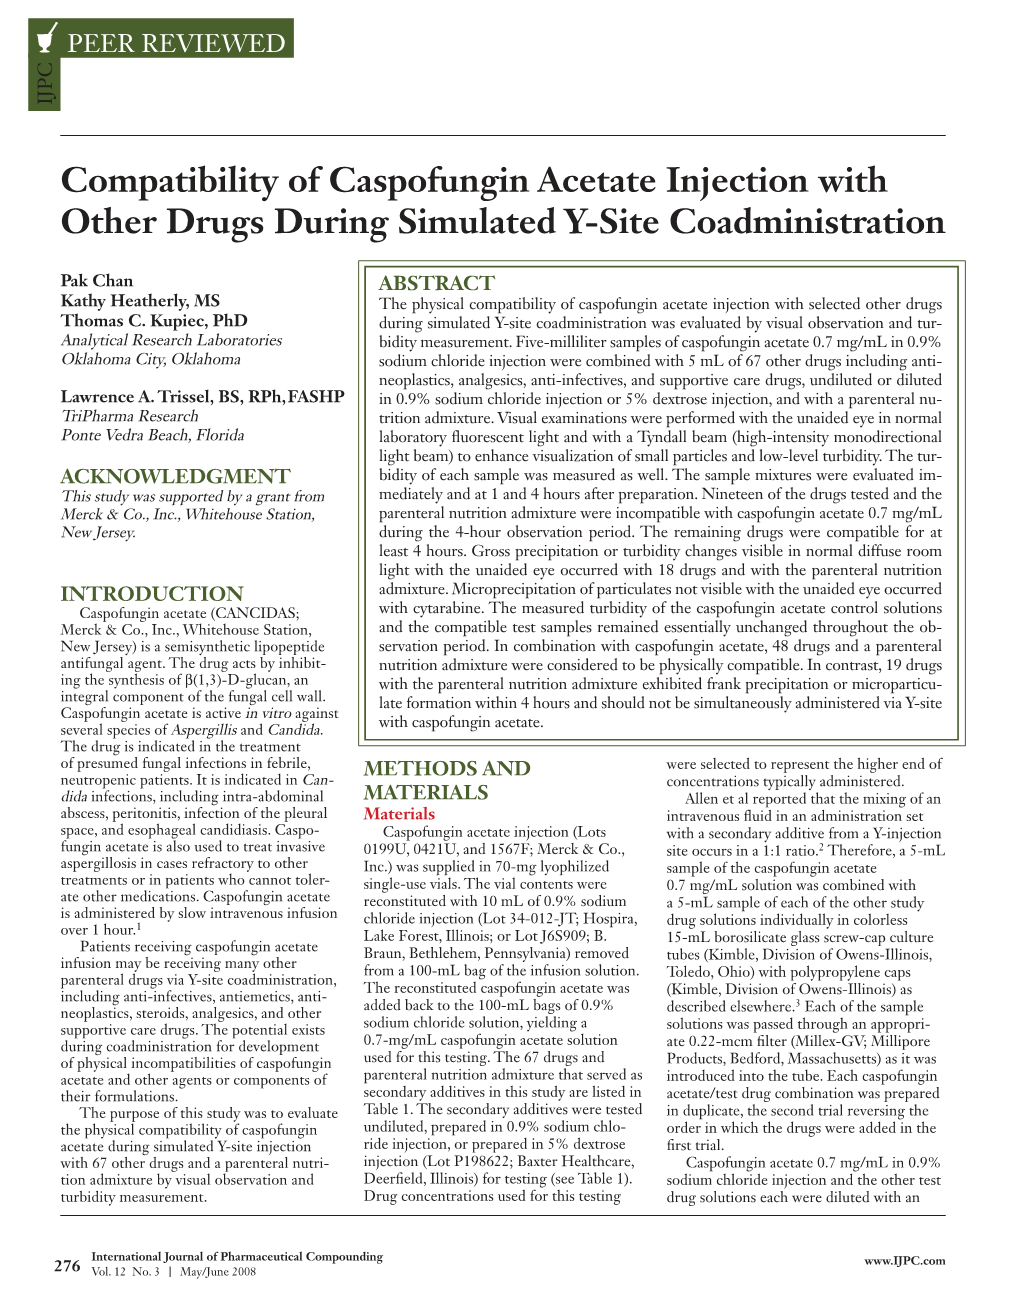 Compatibility of Caspofungin Acetate Injection with Other Drugs During Simulated Y-Site Coadministration